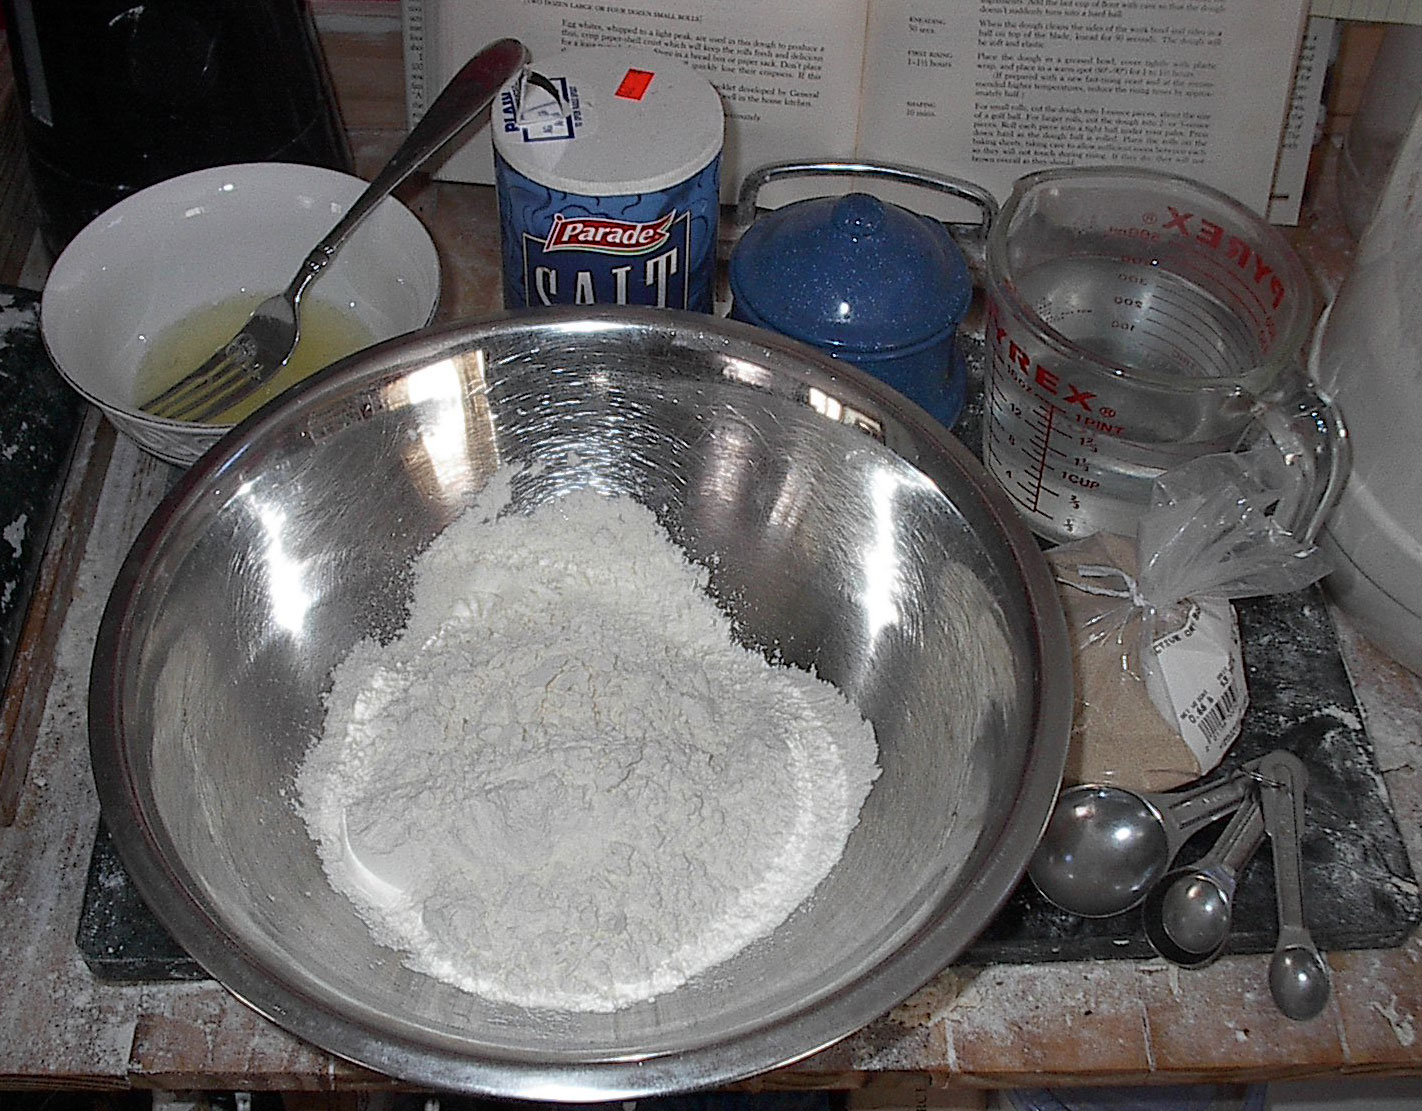 the mixing bowl is full of flour and other ingredients